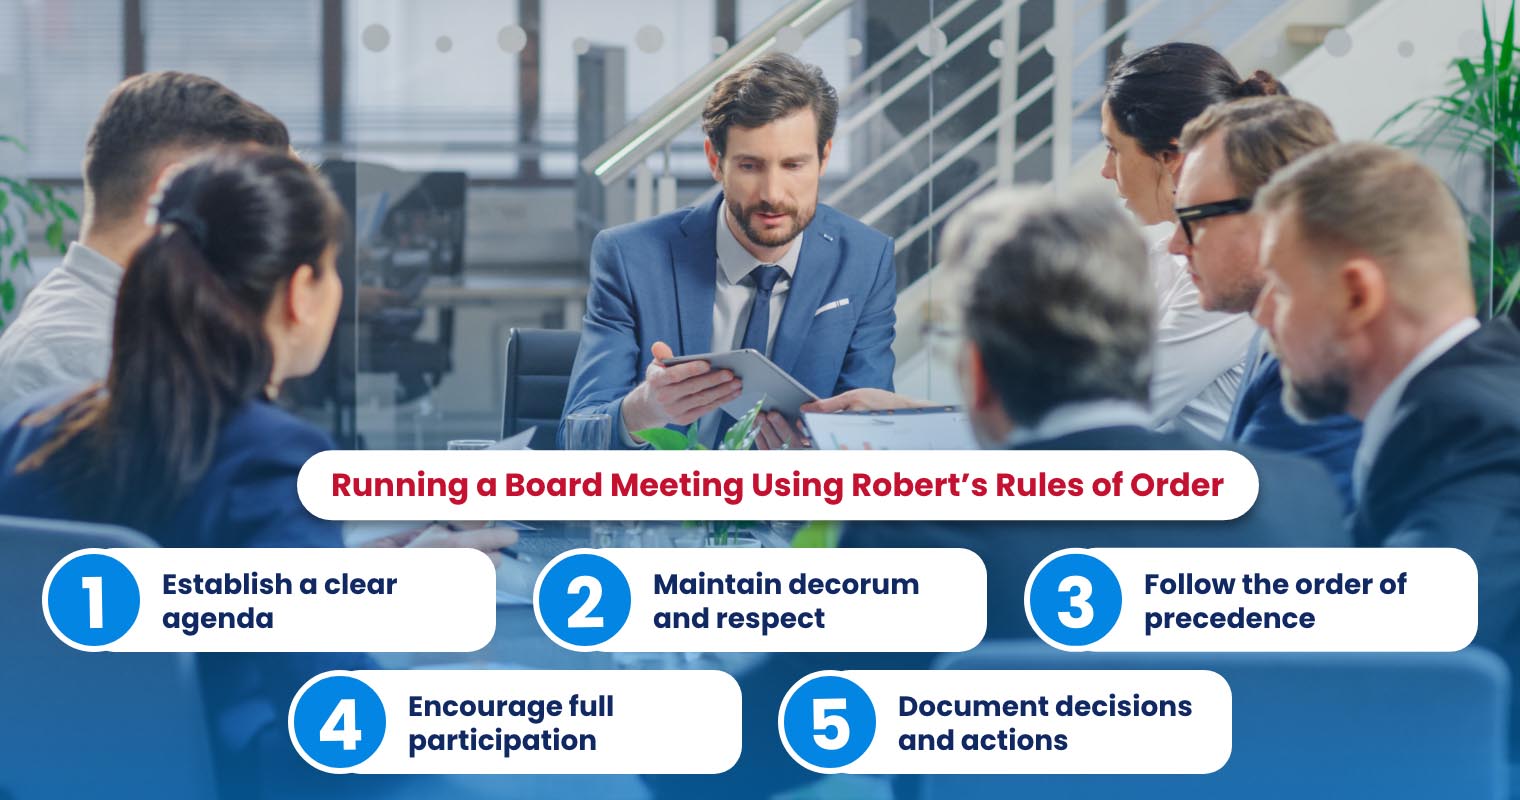 How to Run a Board Meeting Using Robert's Rules of Order